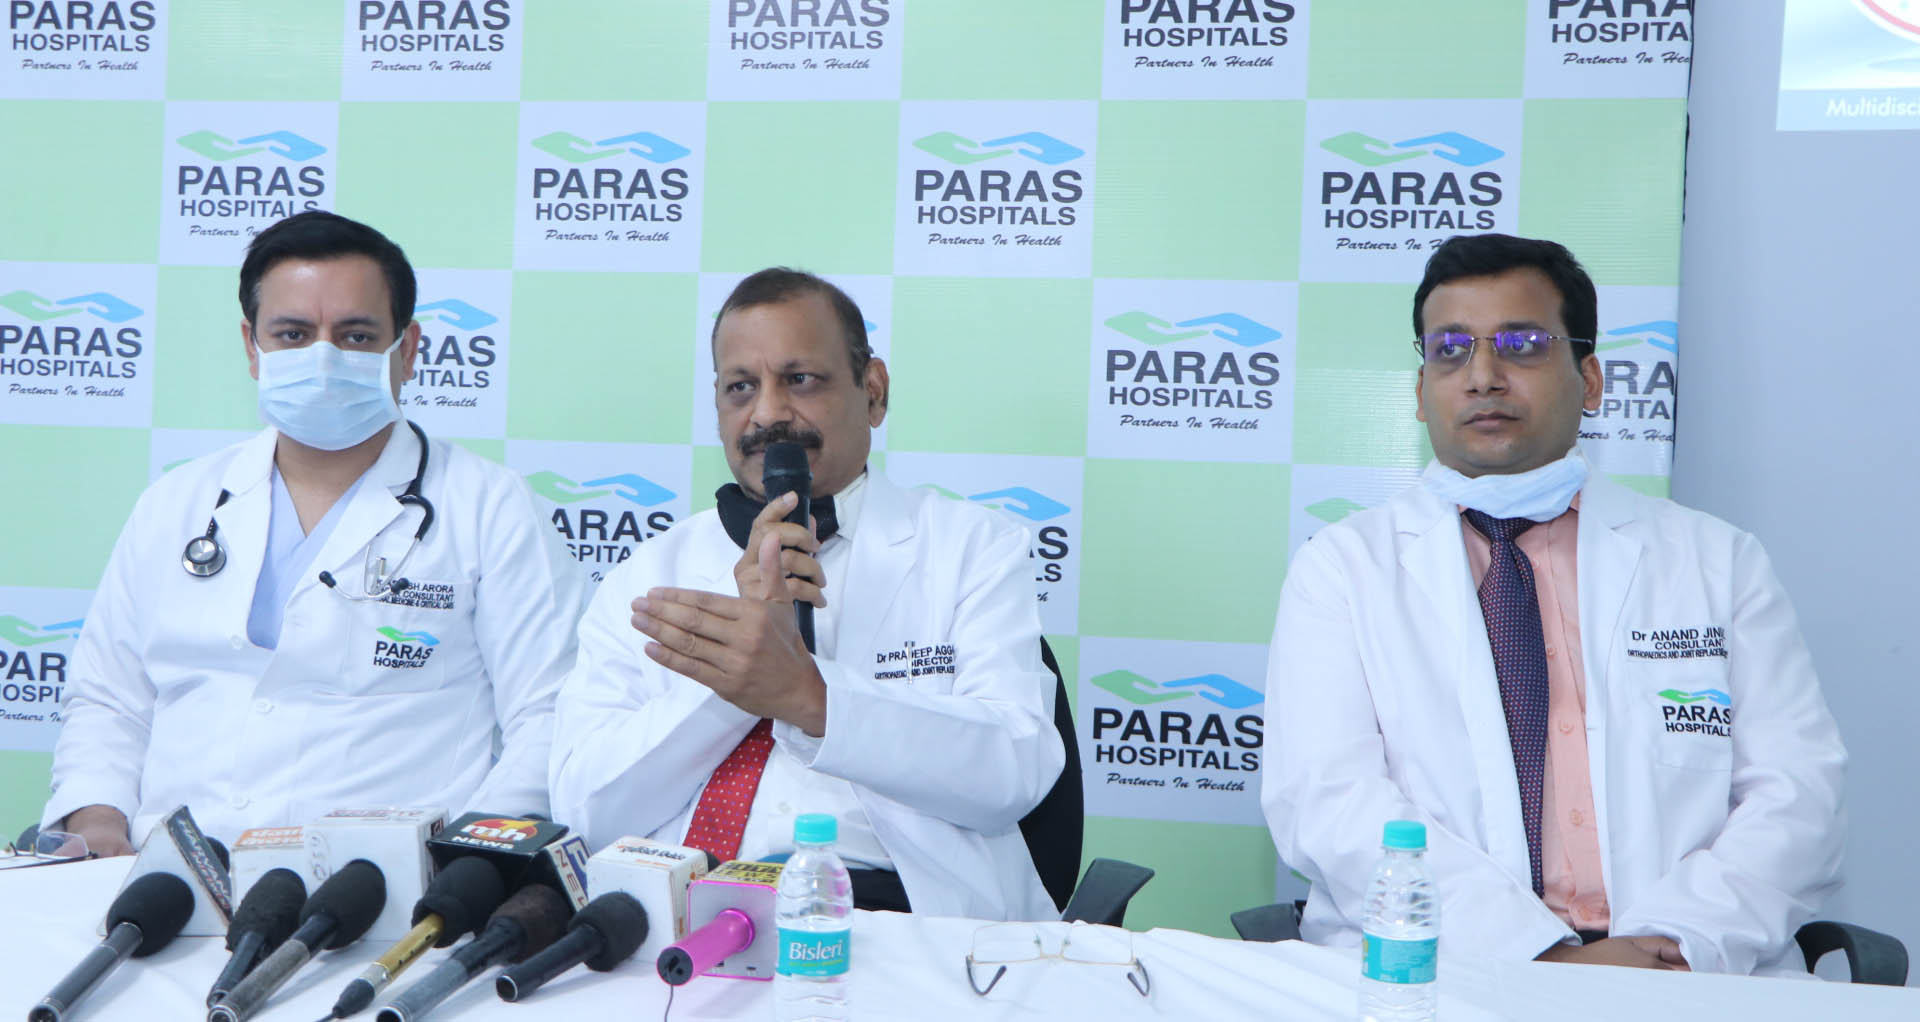 A Polytrauma patient with 6 fractures, head injury & liver injury was successfully treated by Dr. Pradeep Aggarwal And Tream at Paras Hospitals, Panchkula